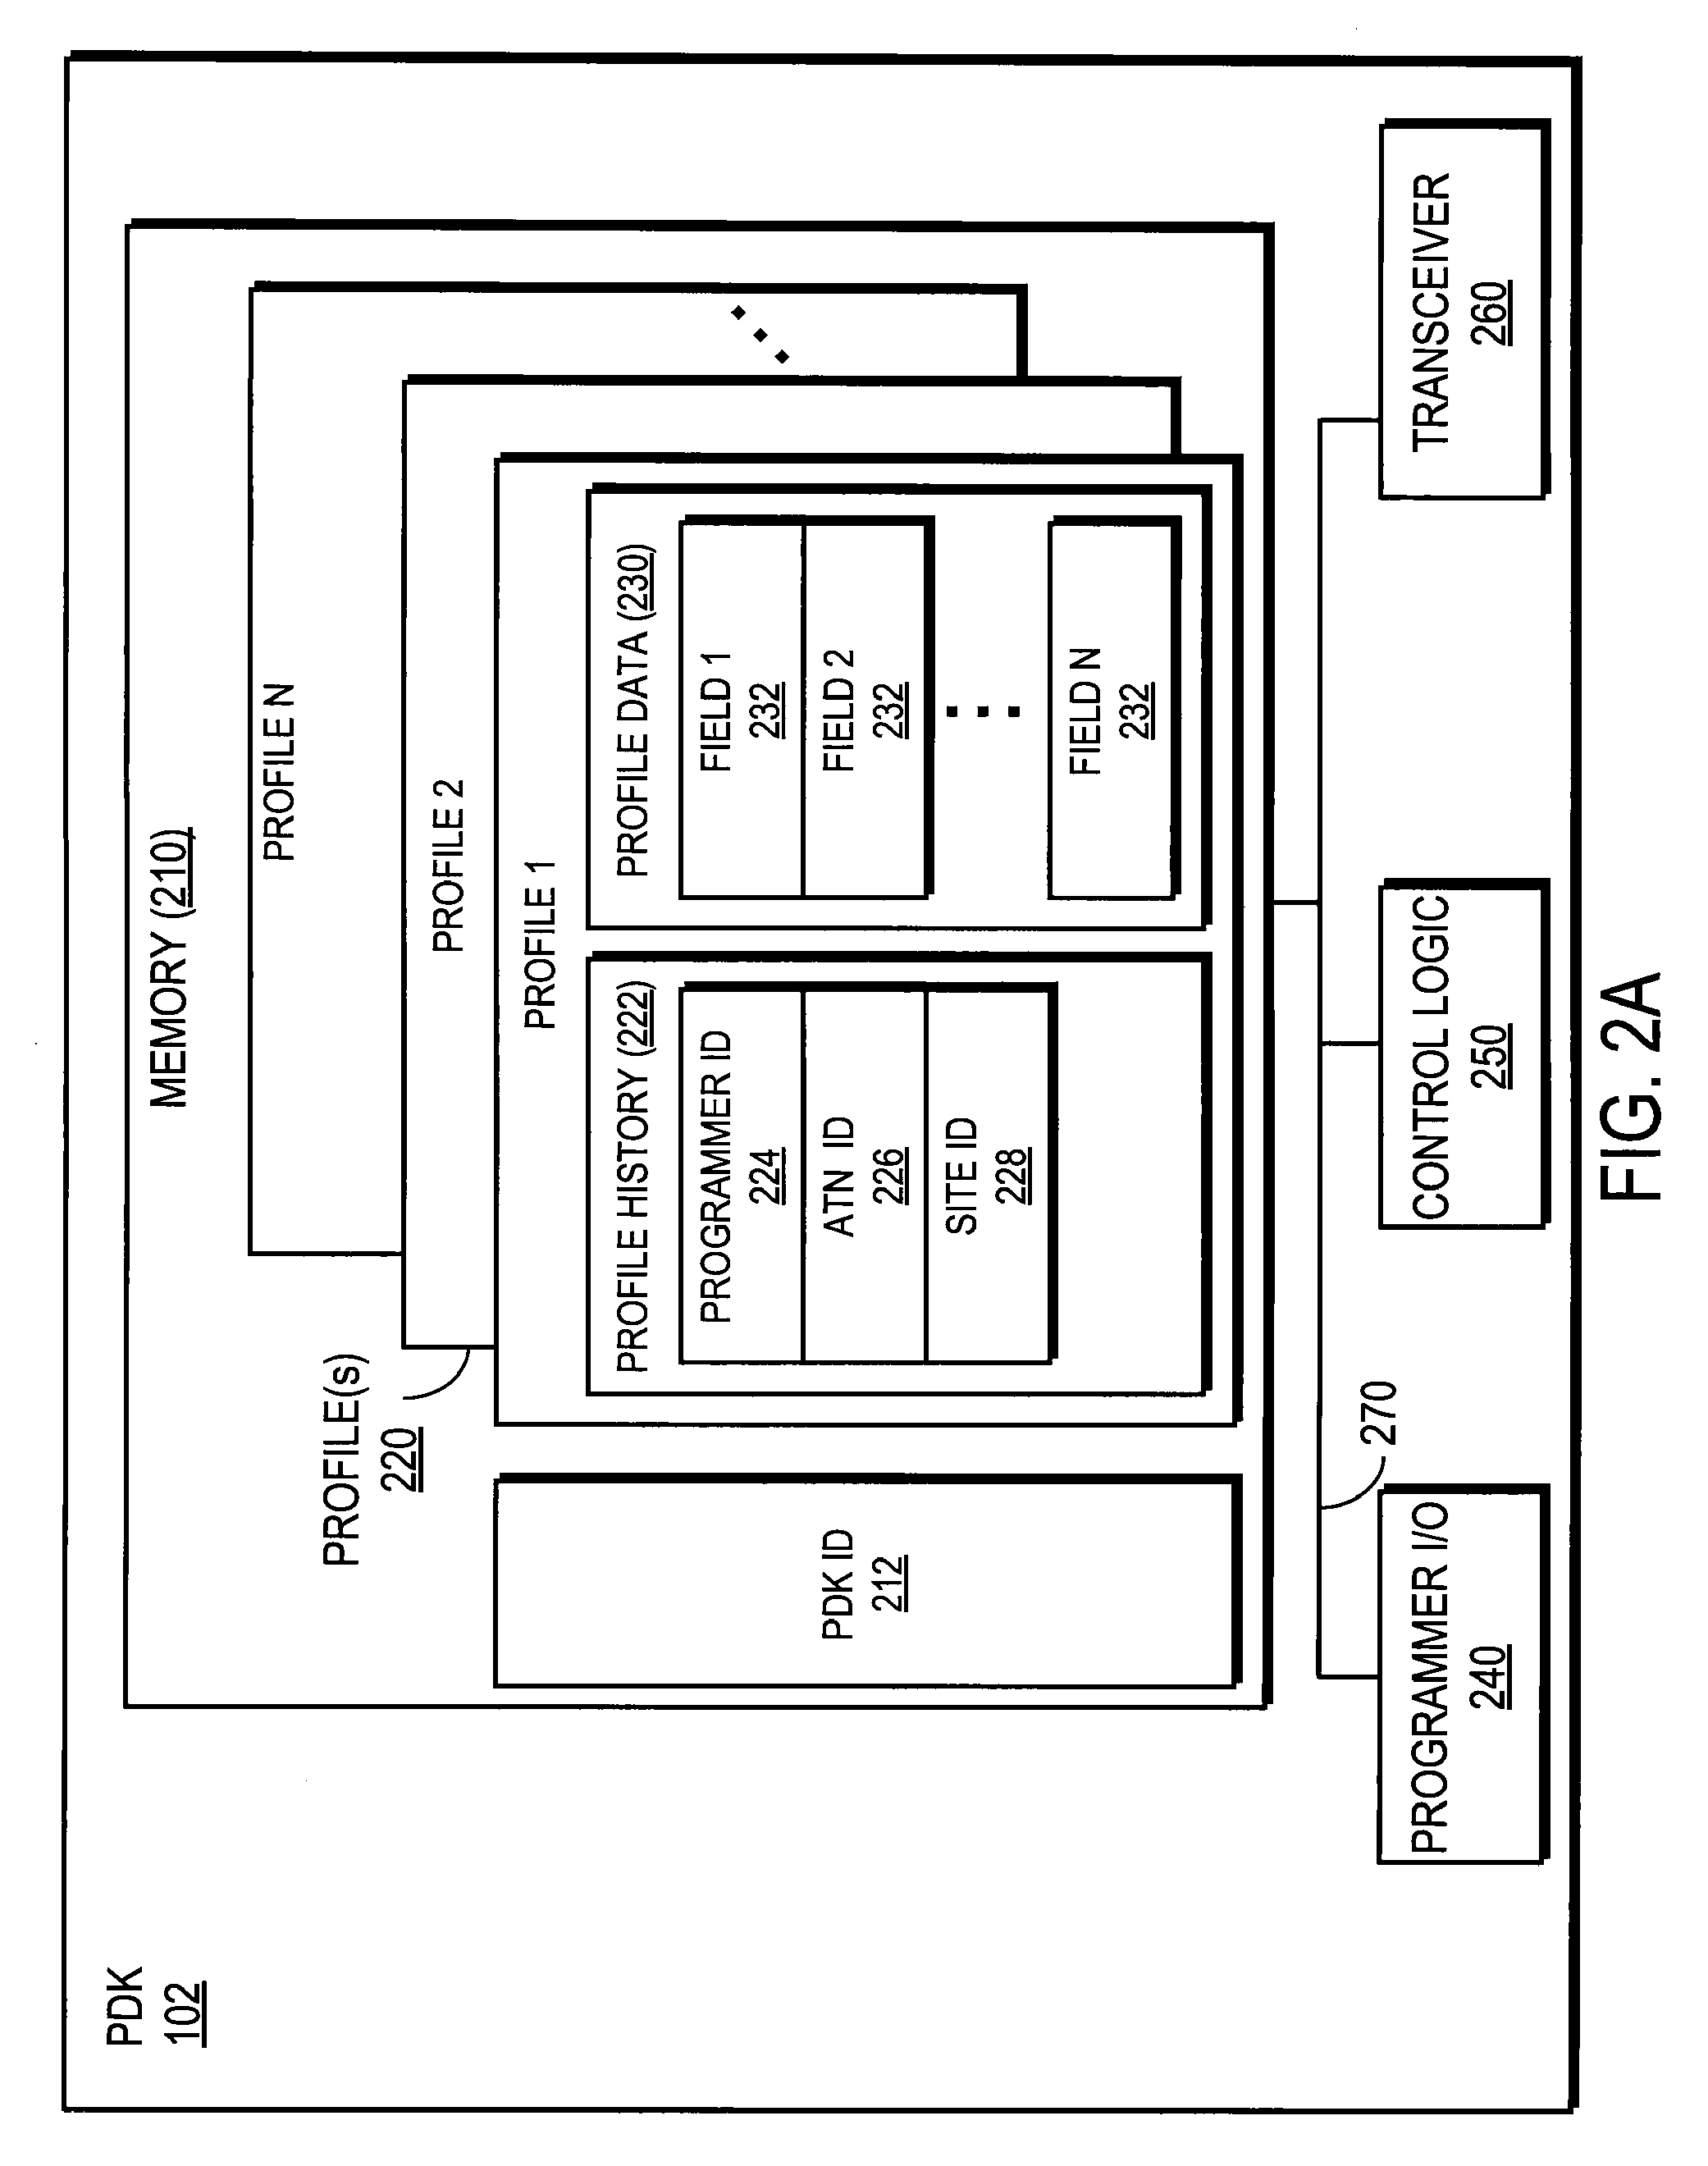 Configuration of Interfaces for a Location Detection System and Application